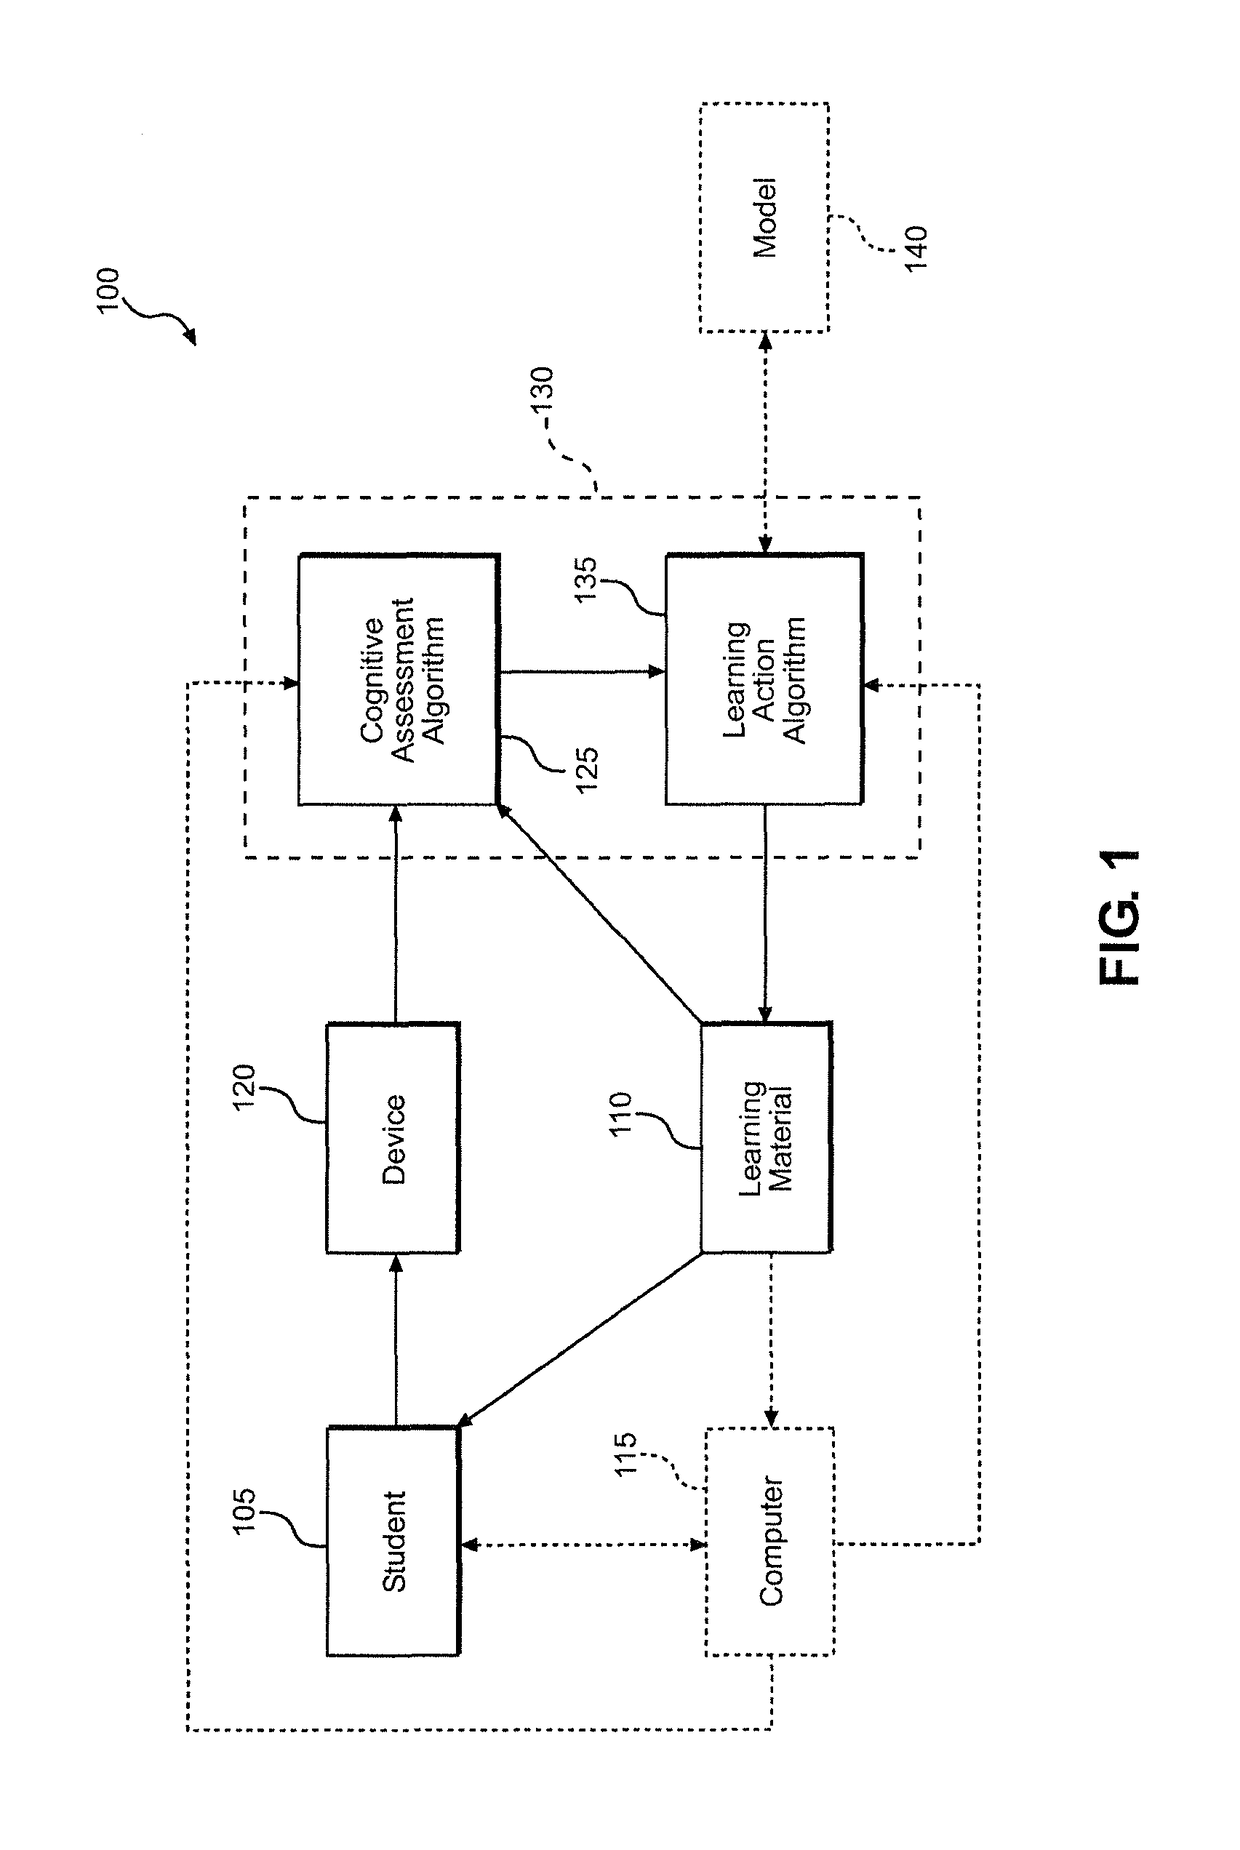 System and method for improving student learning by monitoring student cognitive state